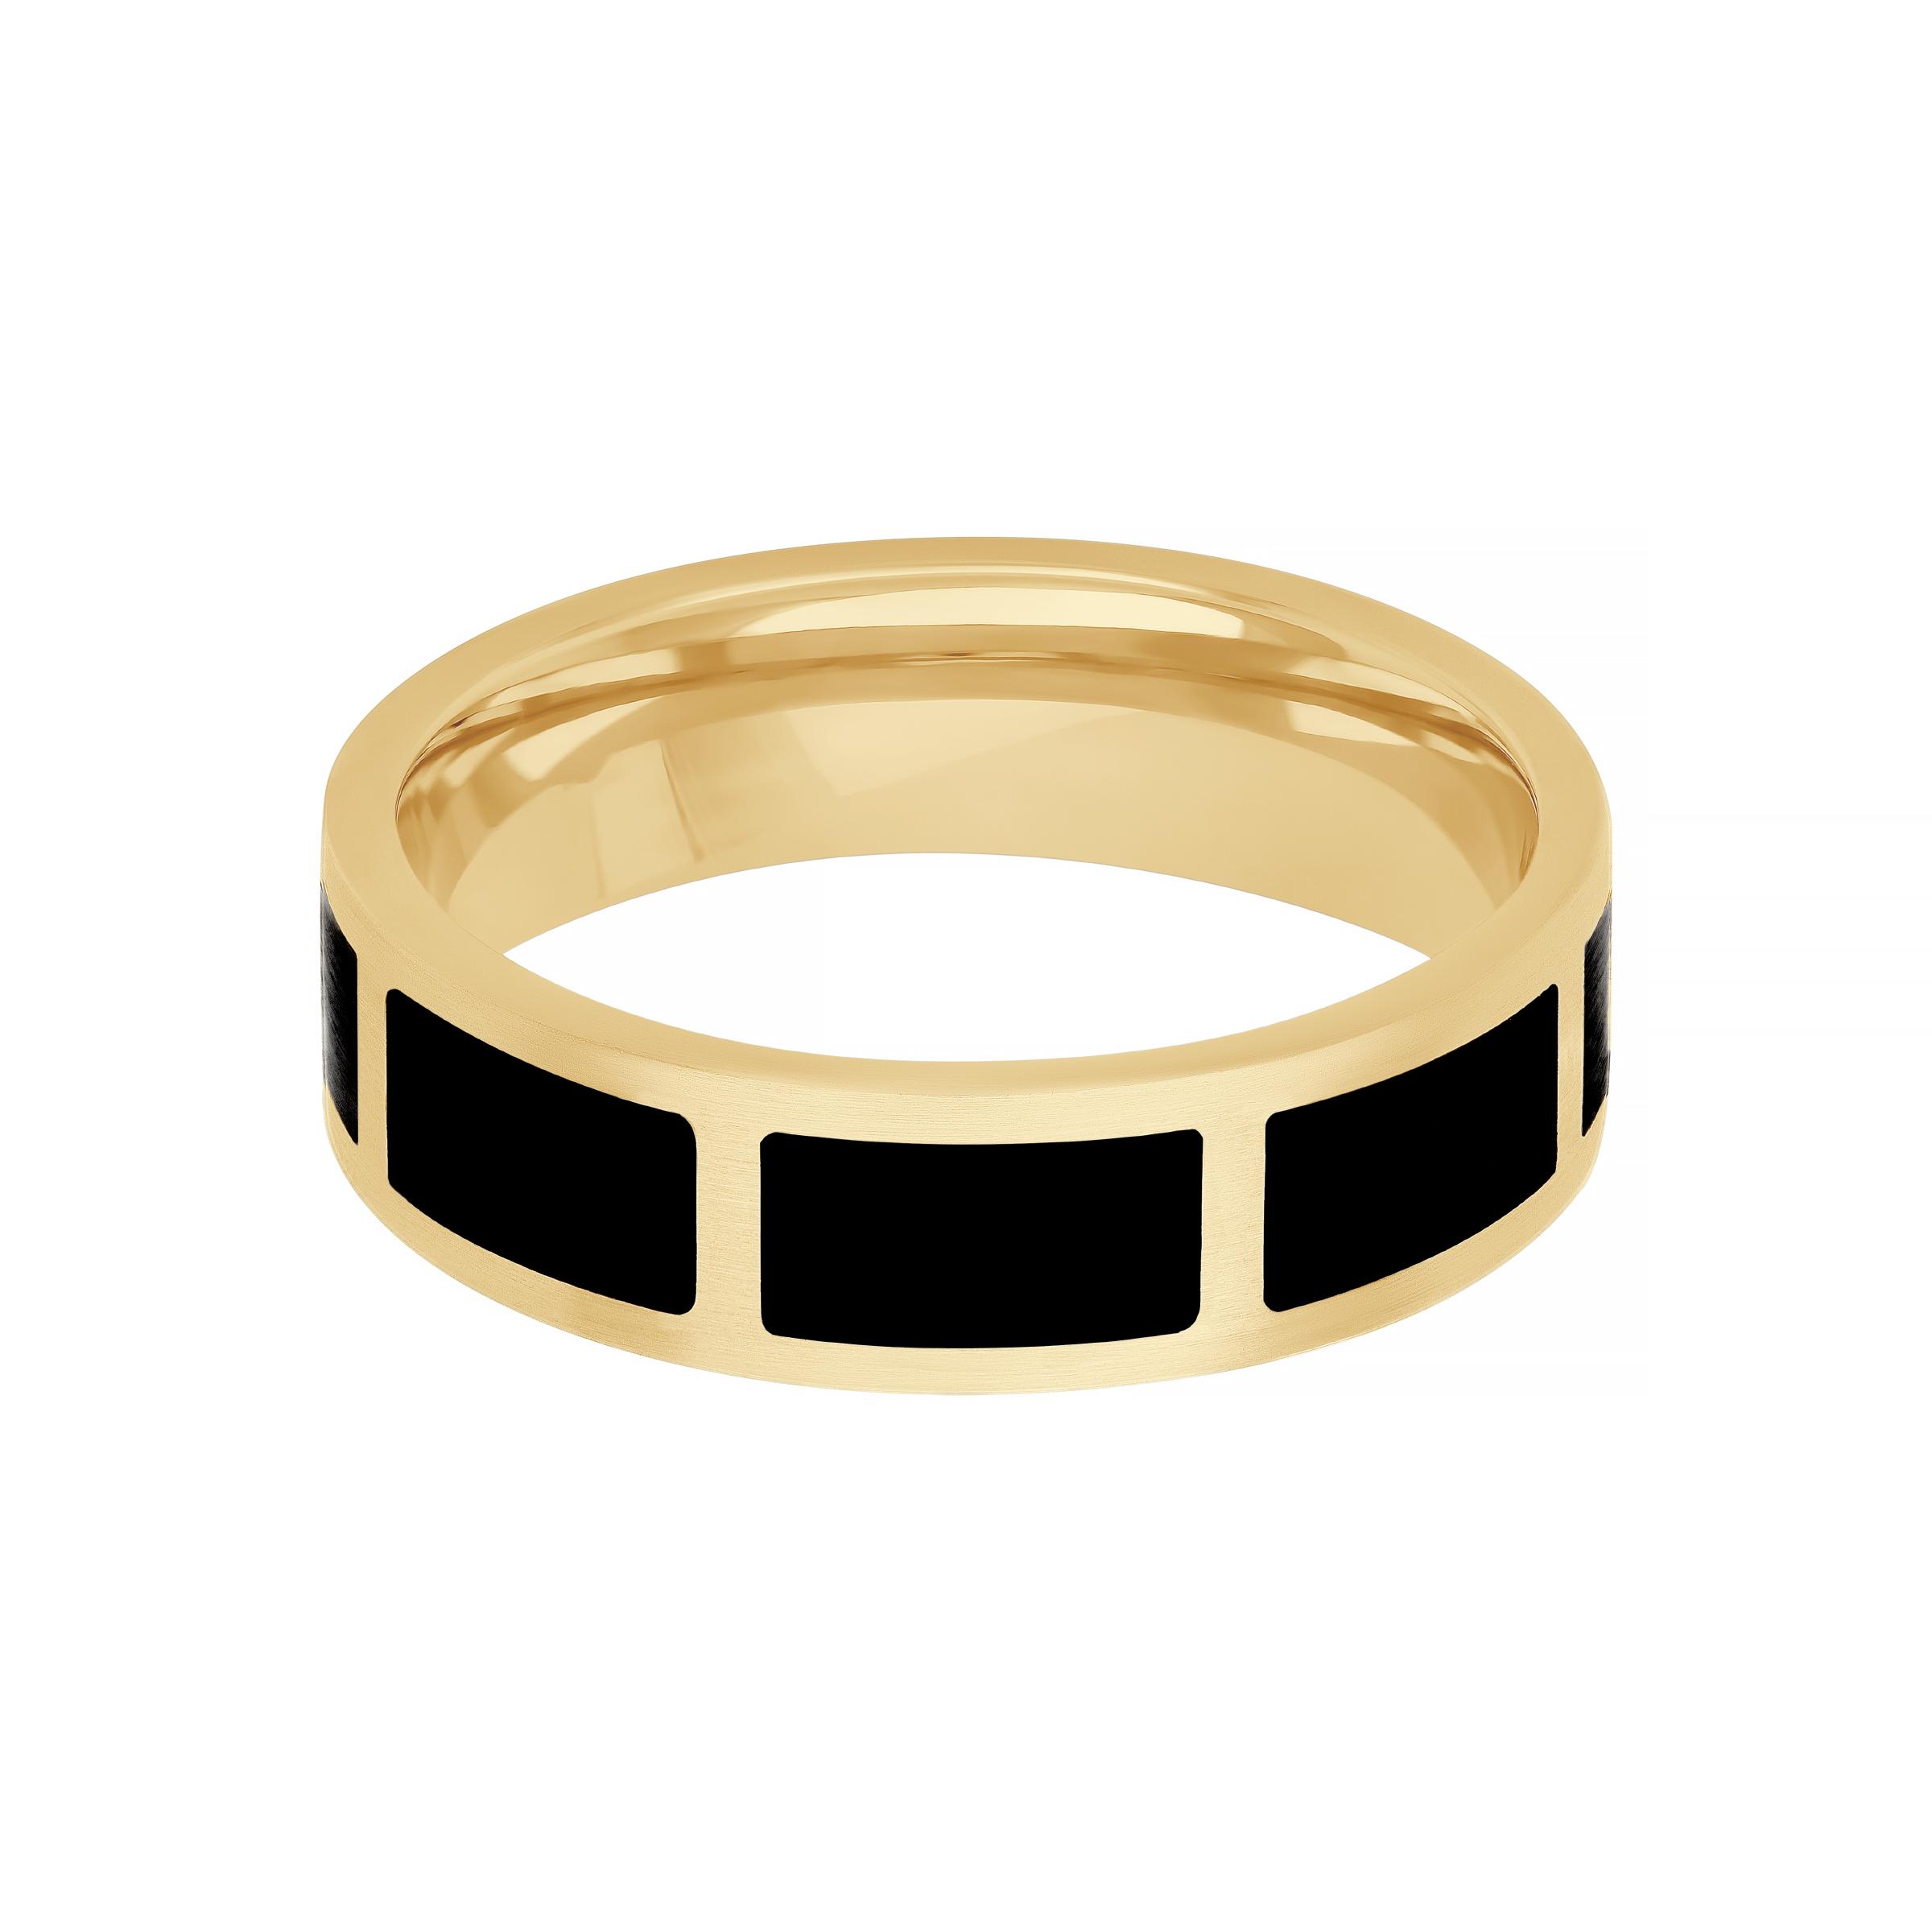 Gent's 14k Yellow Gold Band with Black Ceramic Accents 0